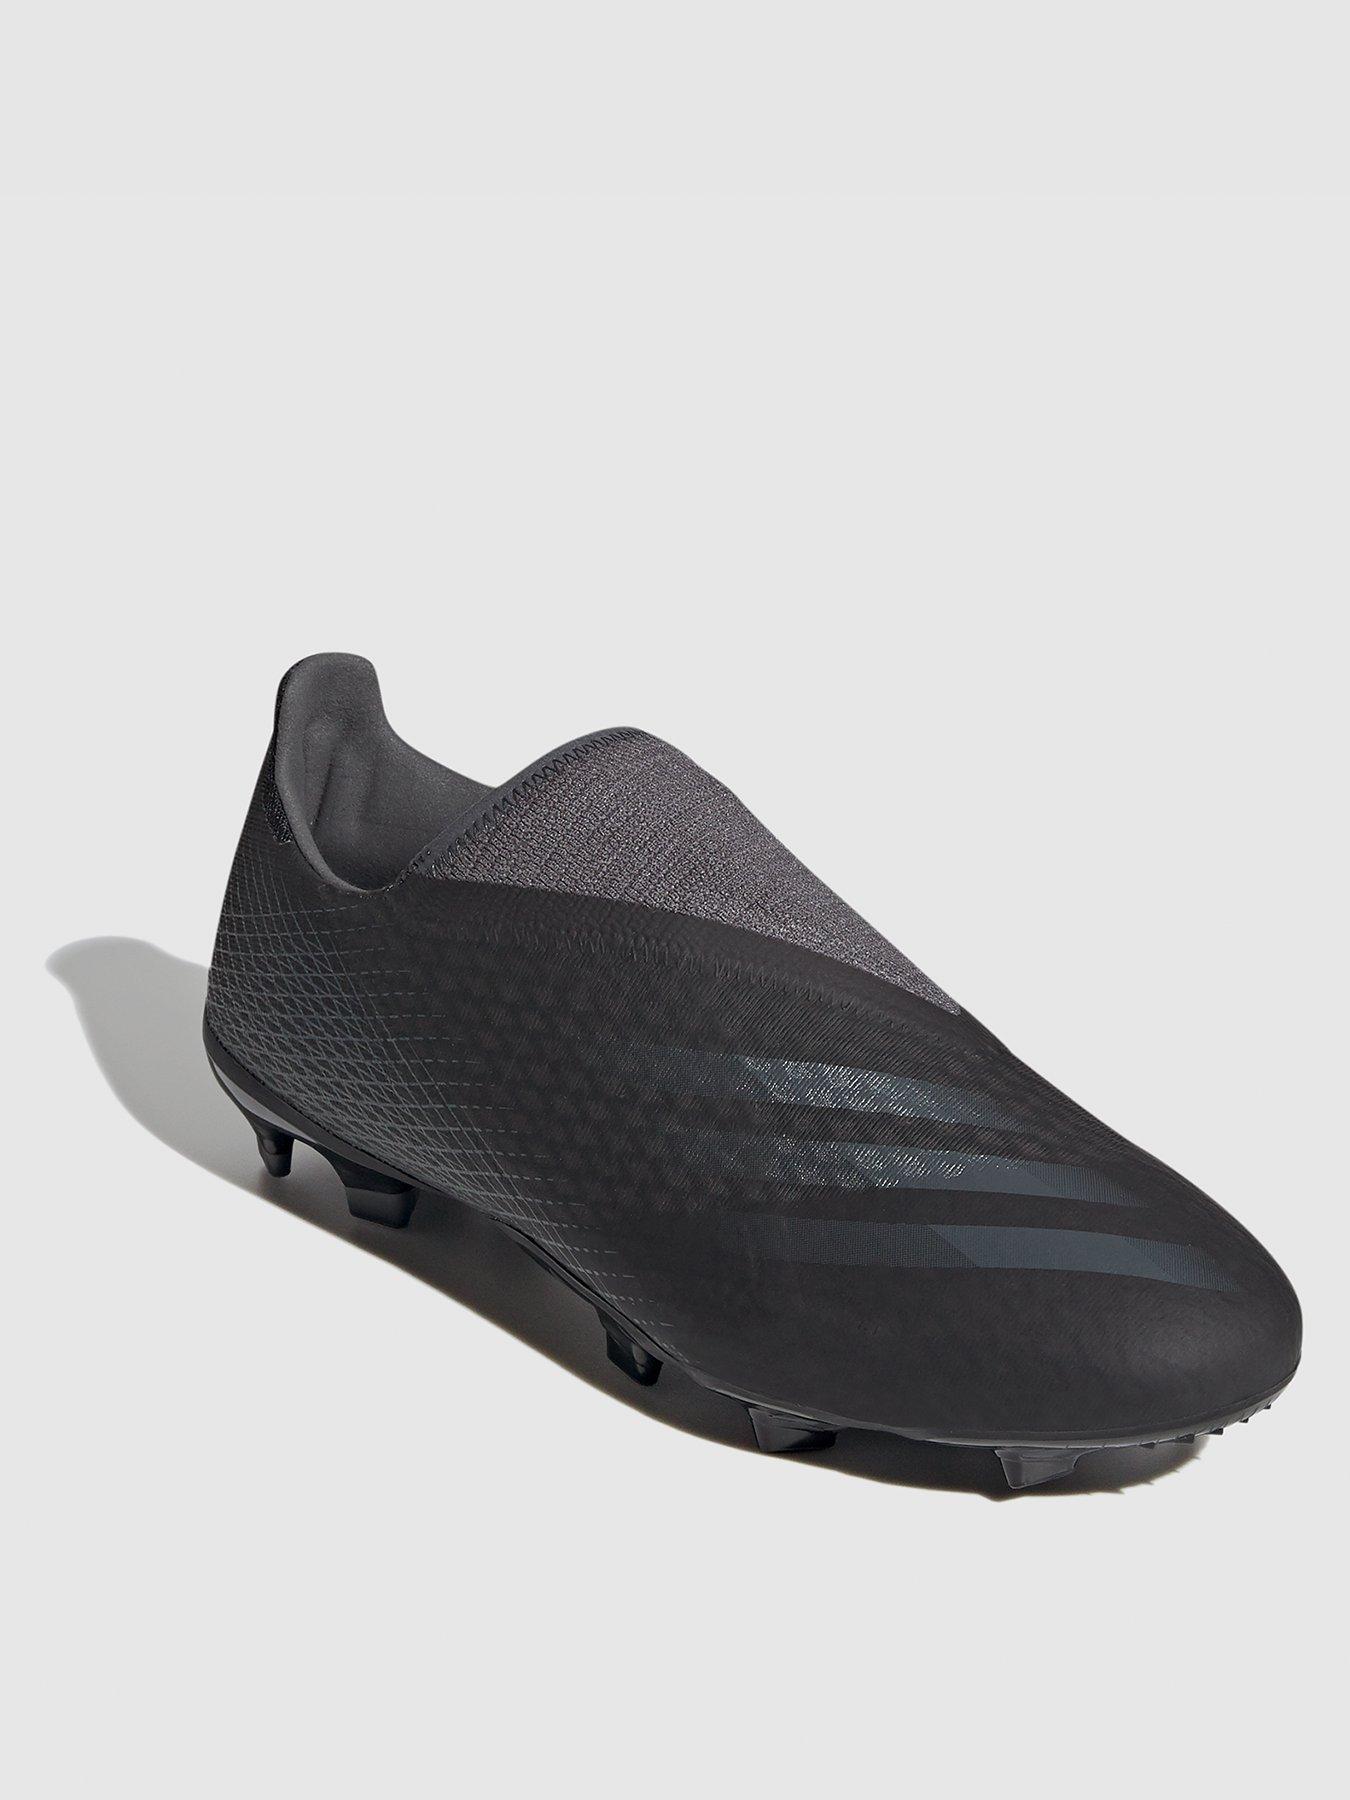 laceless football boots mens